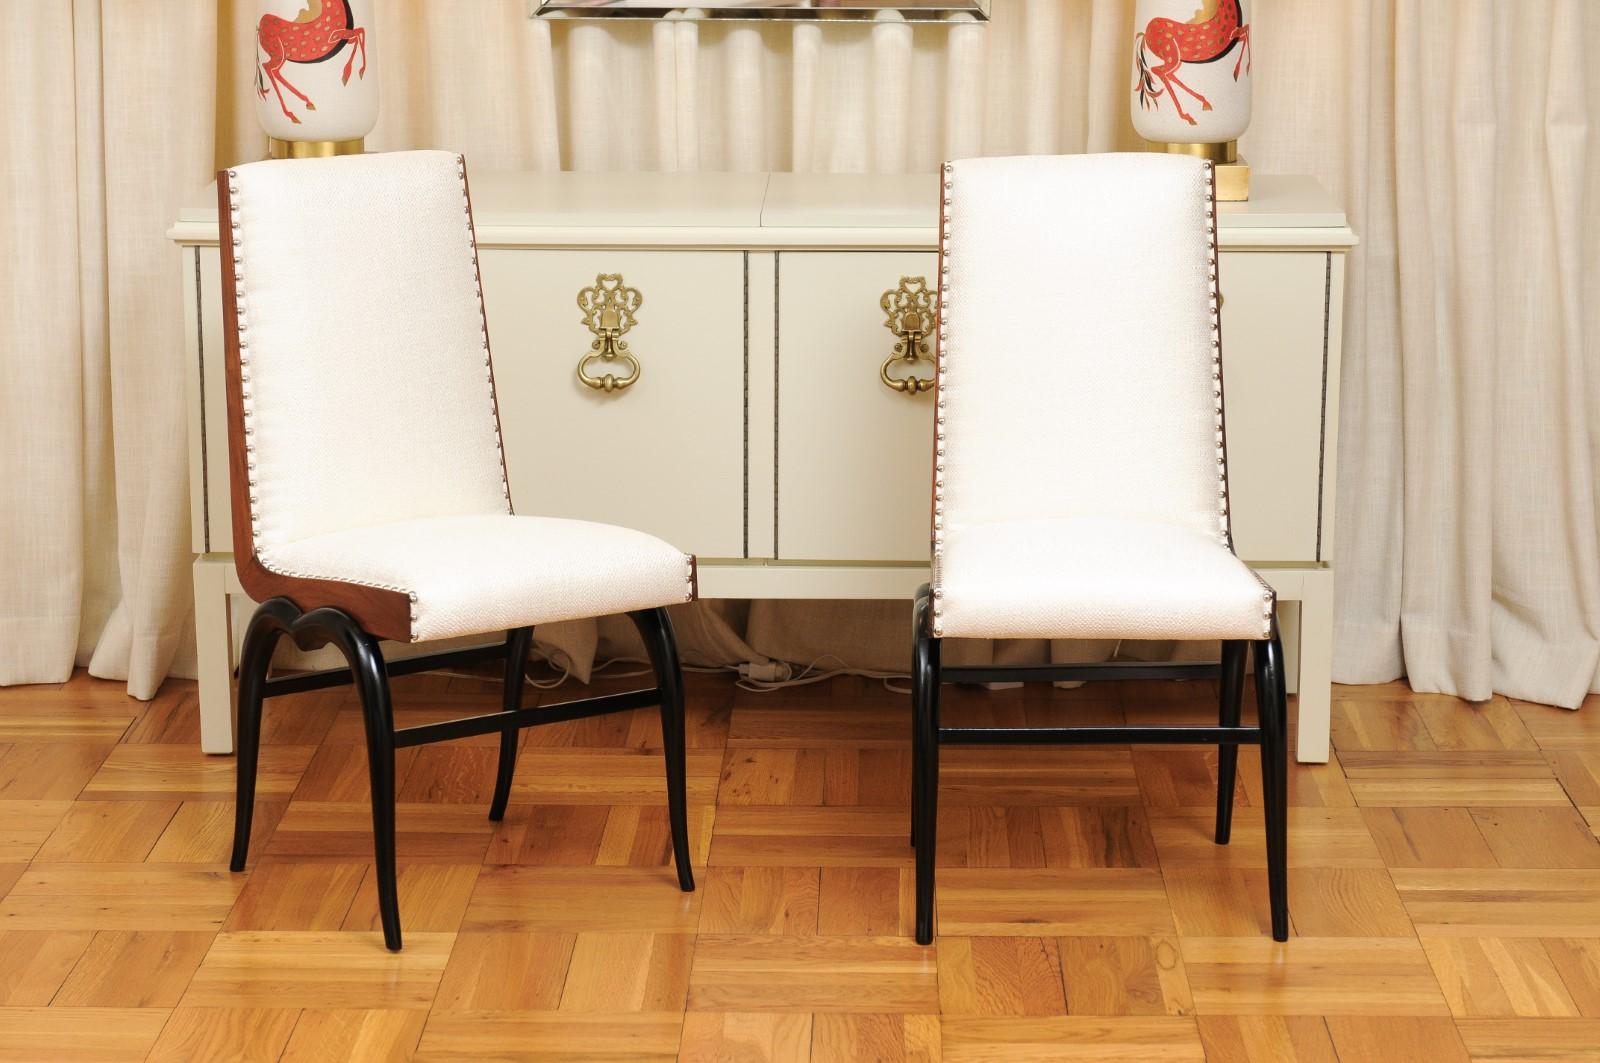 These magnificent dining chairs are shipped as professionally photographed and described in the listing narrative, completely installation ready. This large set is unique on the market. Expert custom upholstery service is available.

A sophisticated